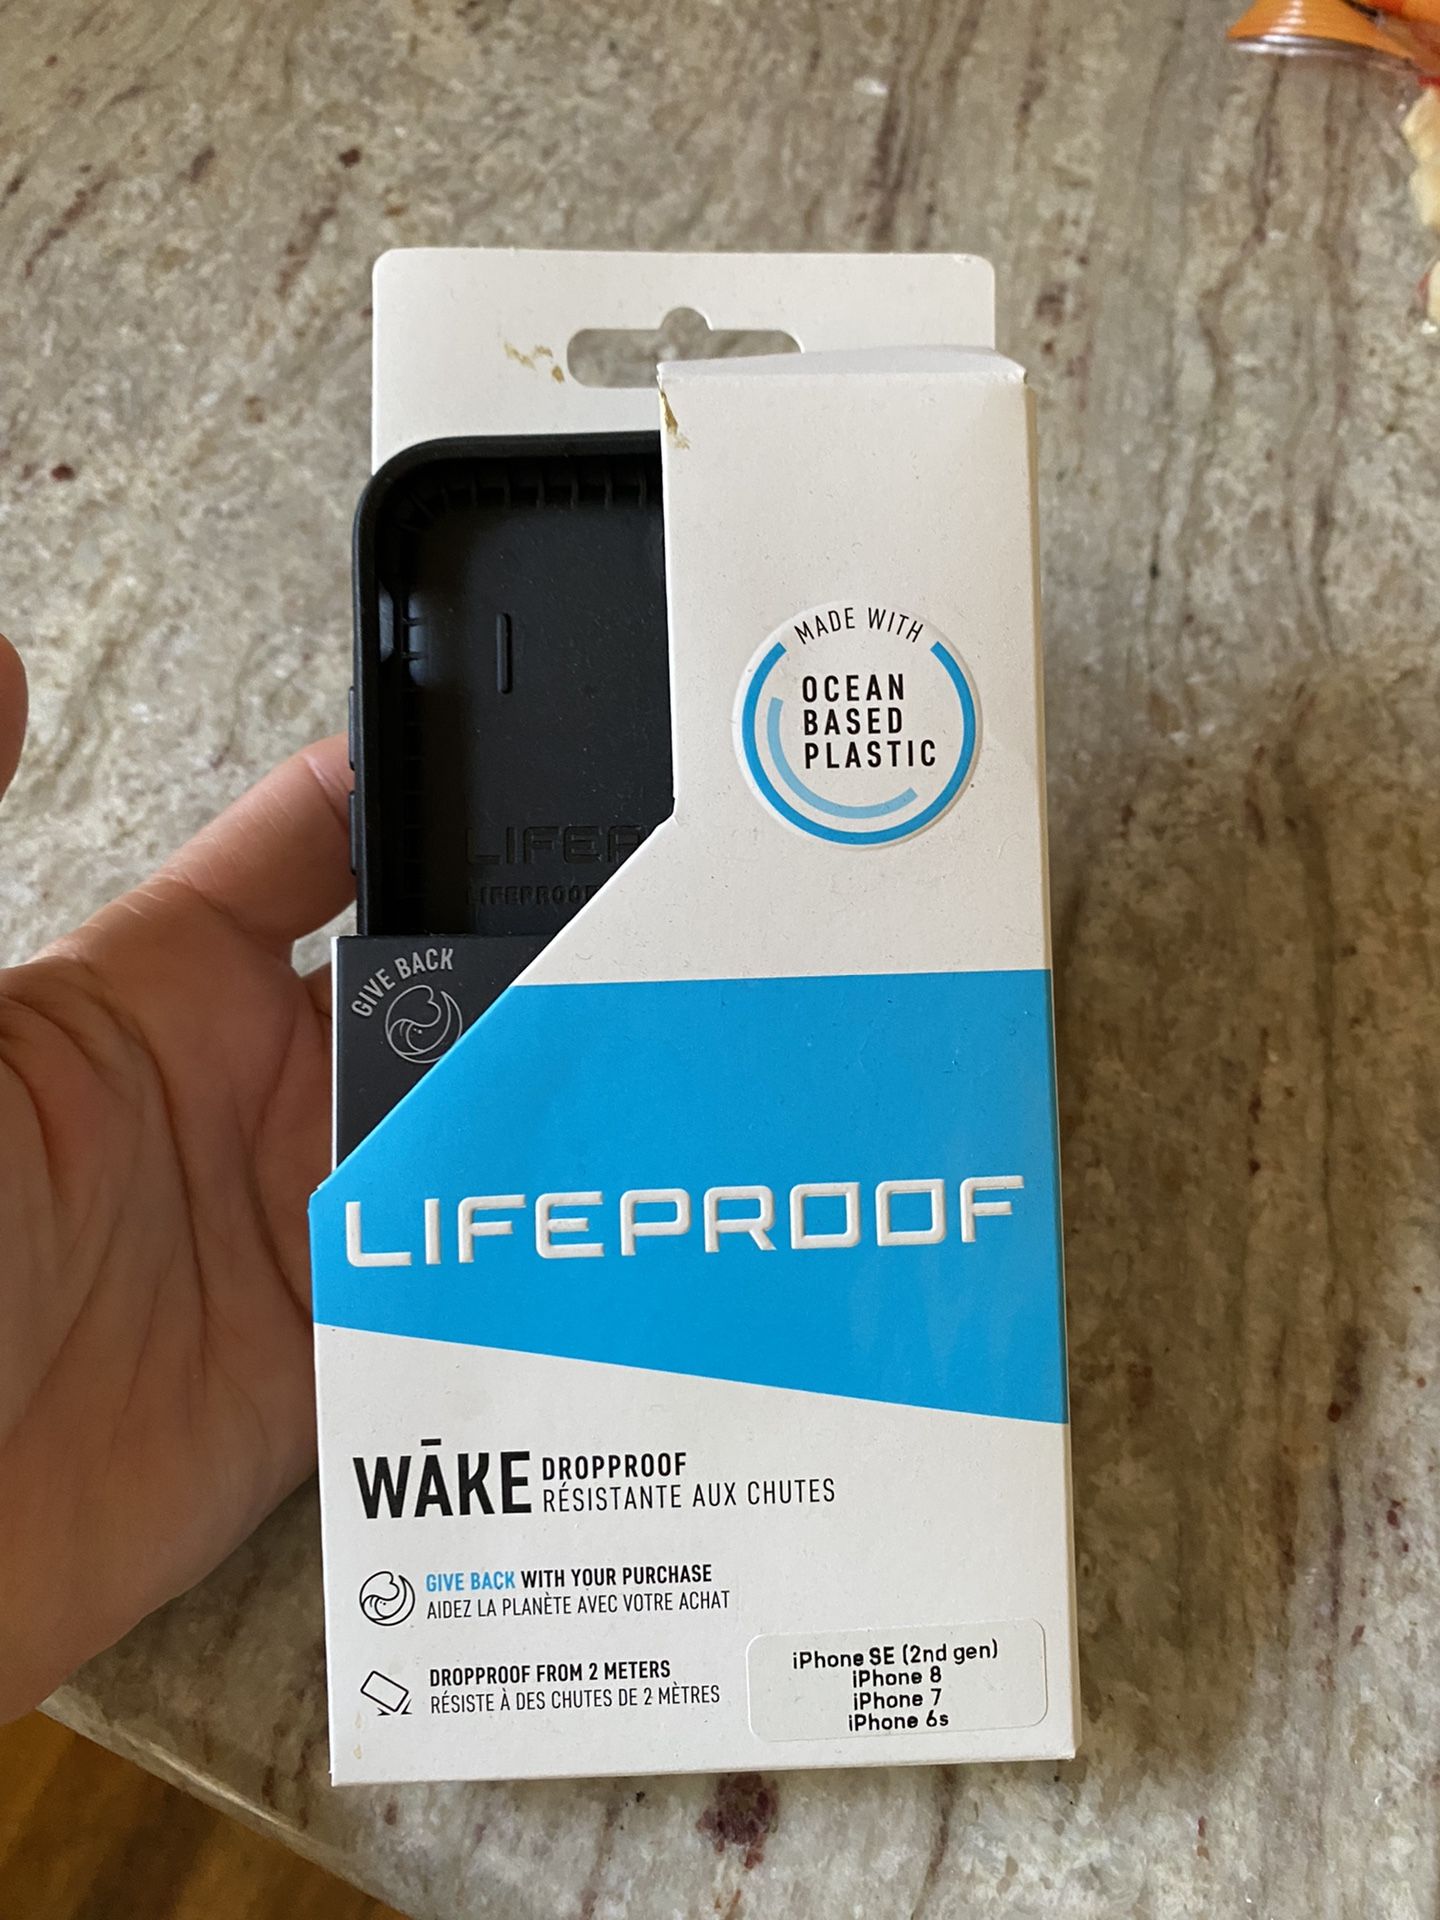 Life proof Phone Case iPhone 6s, 7 , And 8